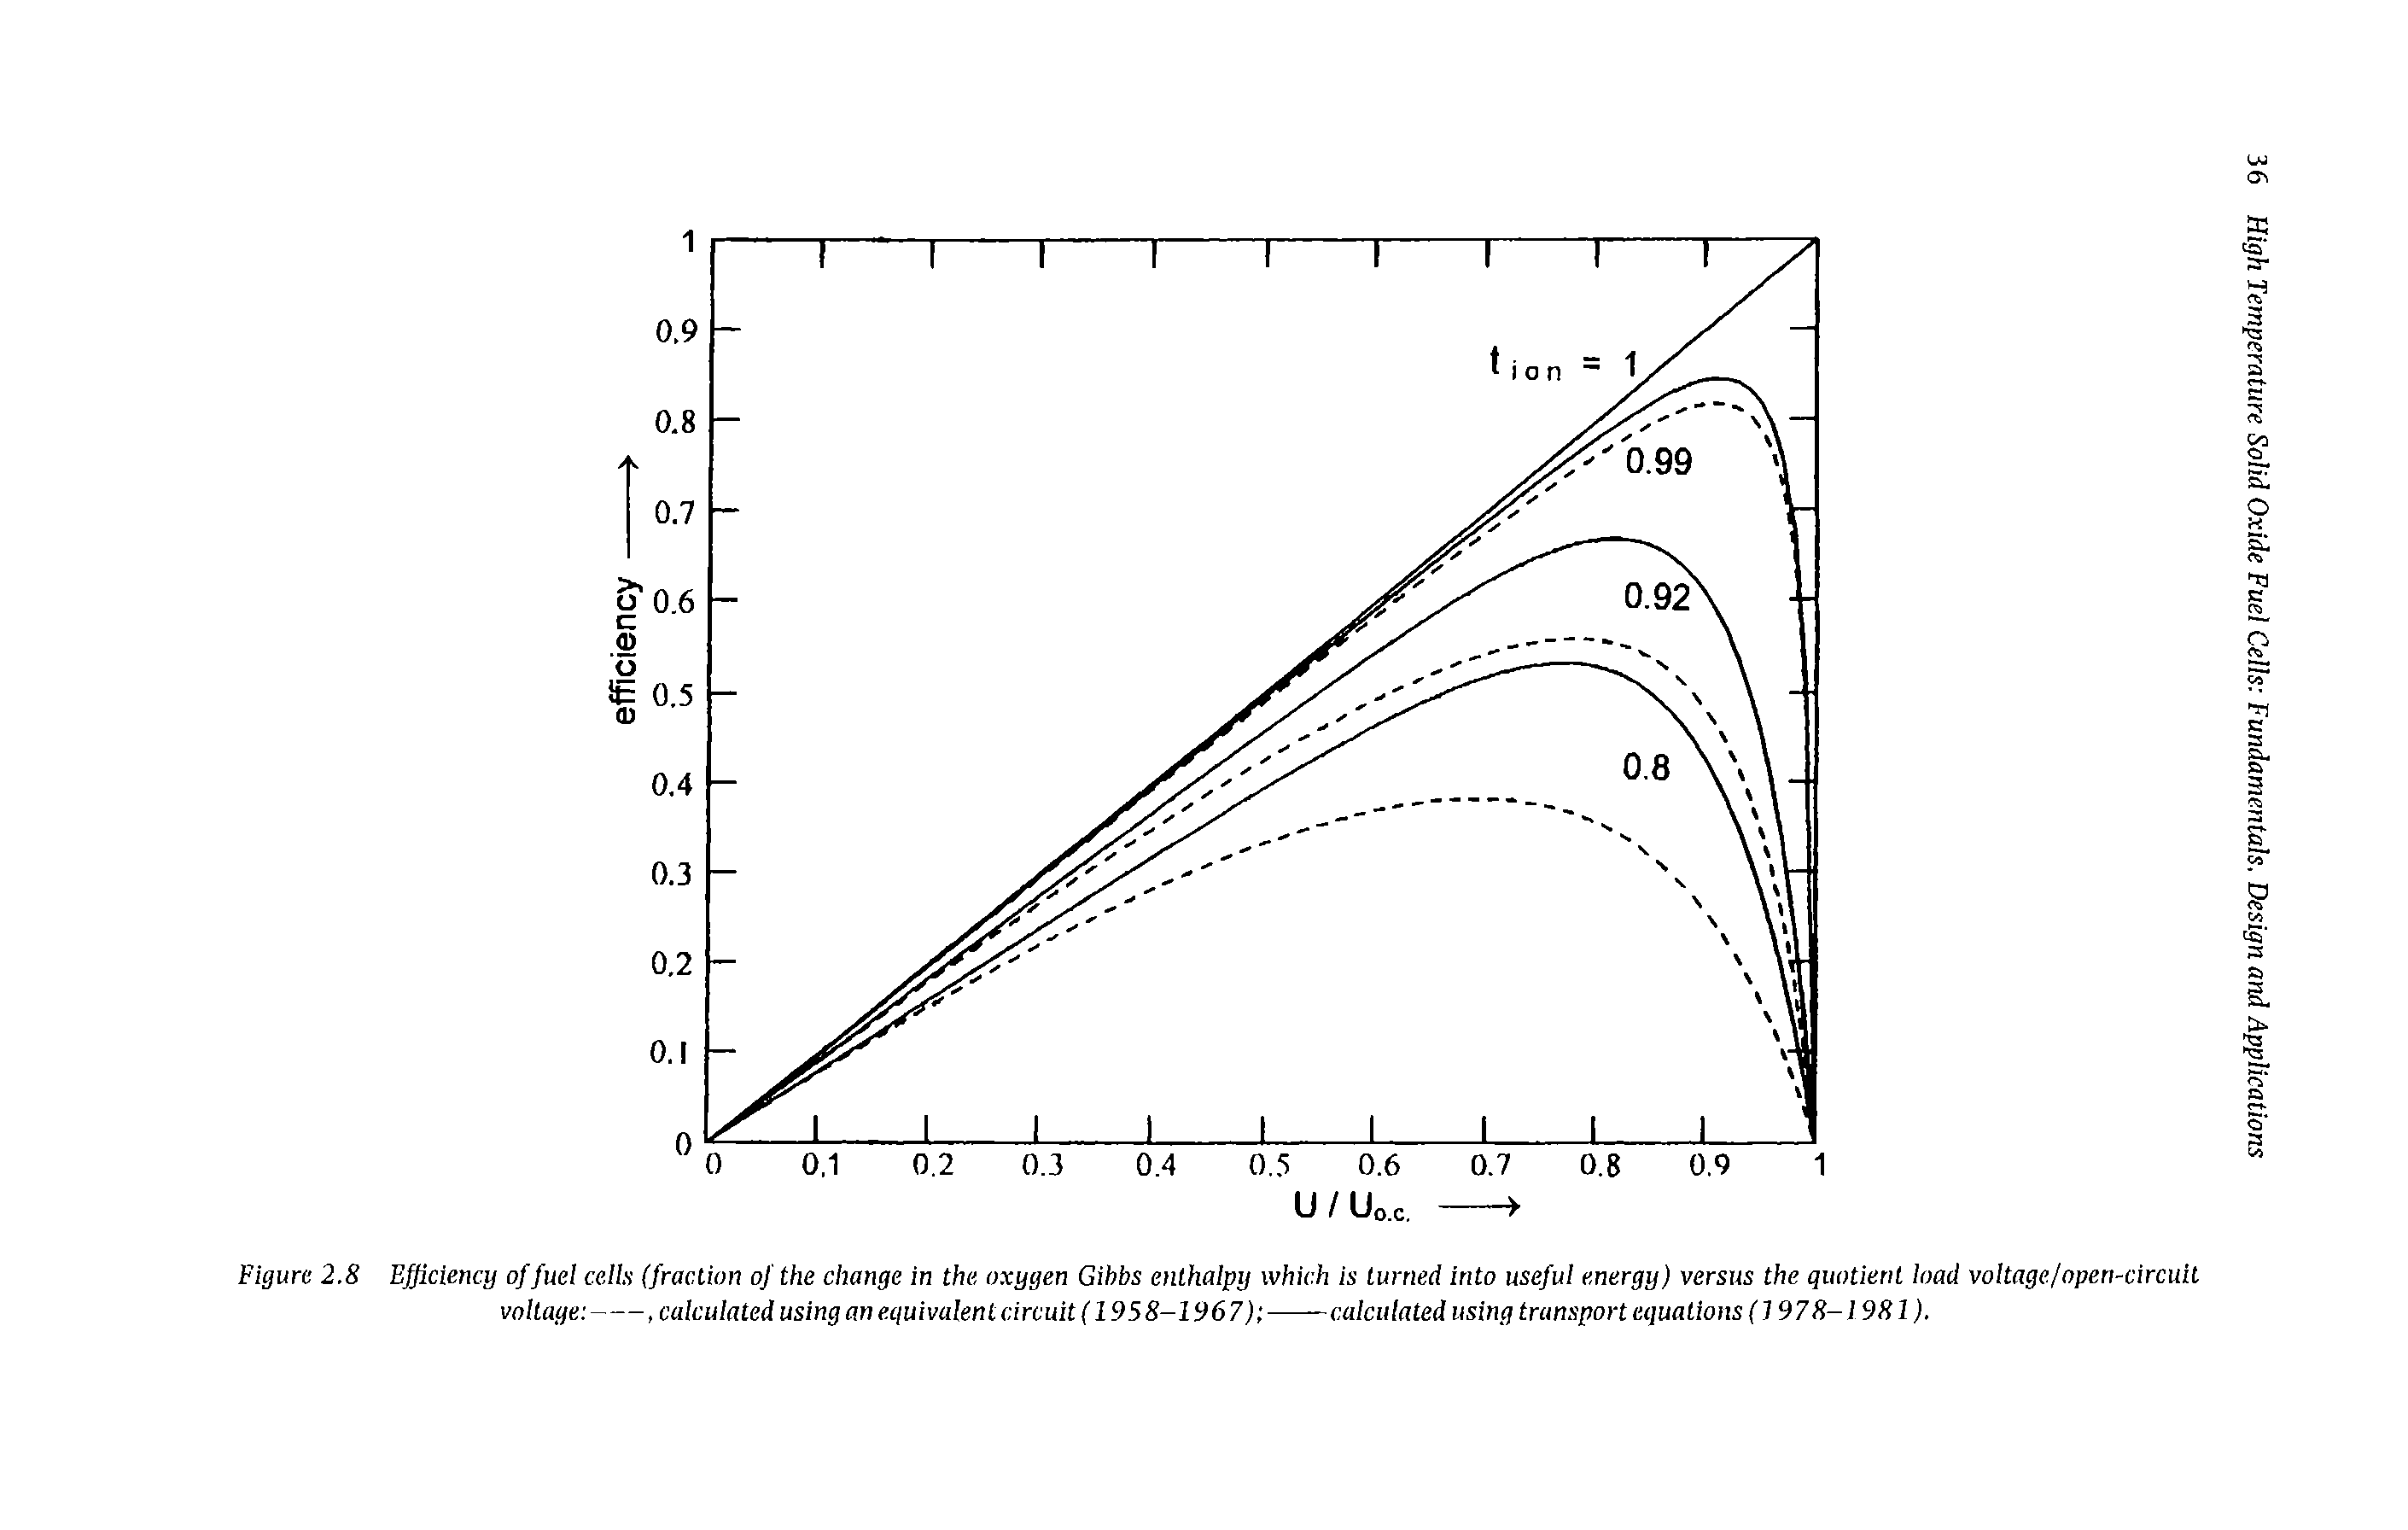 Figure 2.8 Efficiency of fuel cells (fraction of the change in the oxygen Gihbs enthalpy which is turned into useful energy) versus the quotient load voltage open-circuit voltage ----------------------------, calculated using an equivalent circuit (1958-1967) -------calculated using transport equations (1978-1981).